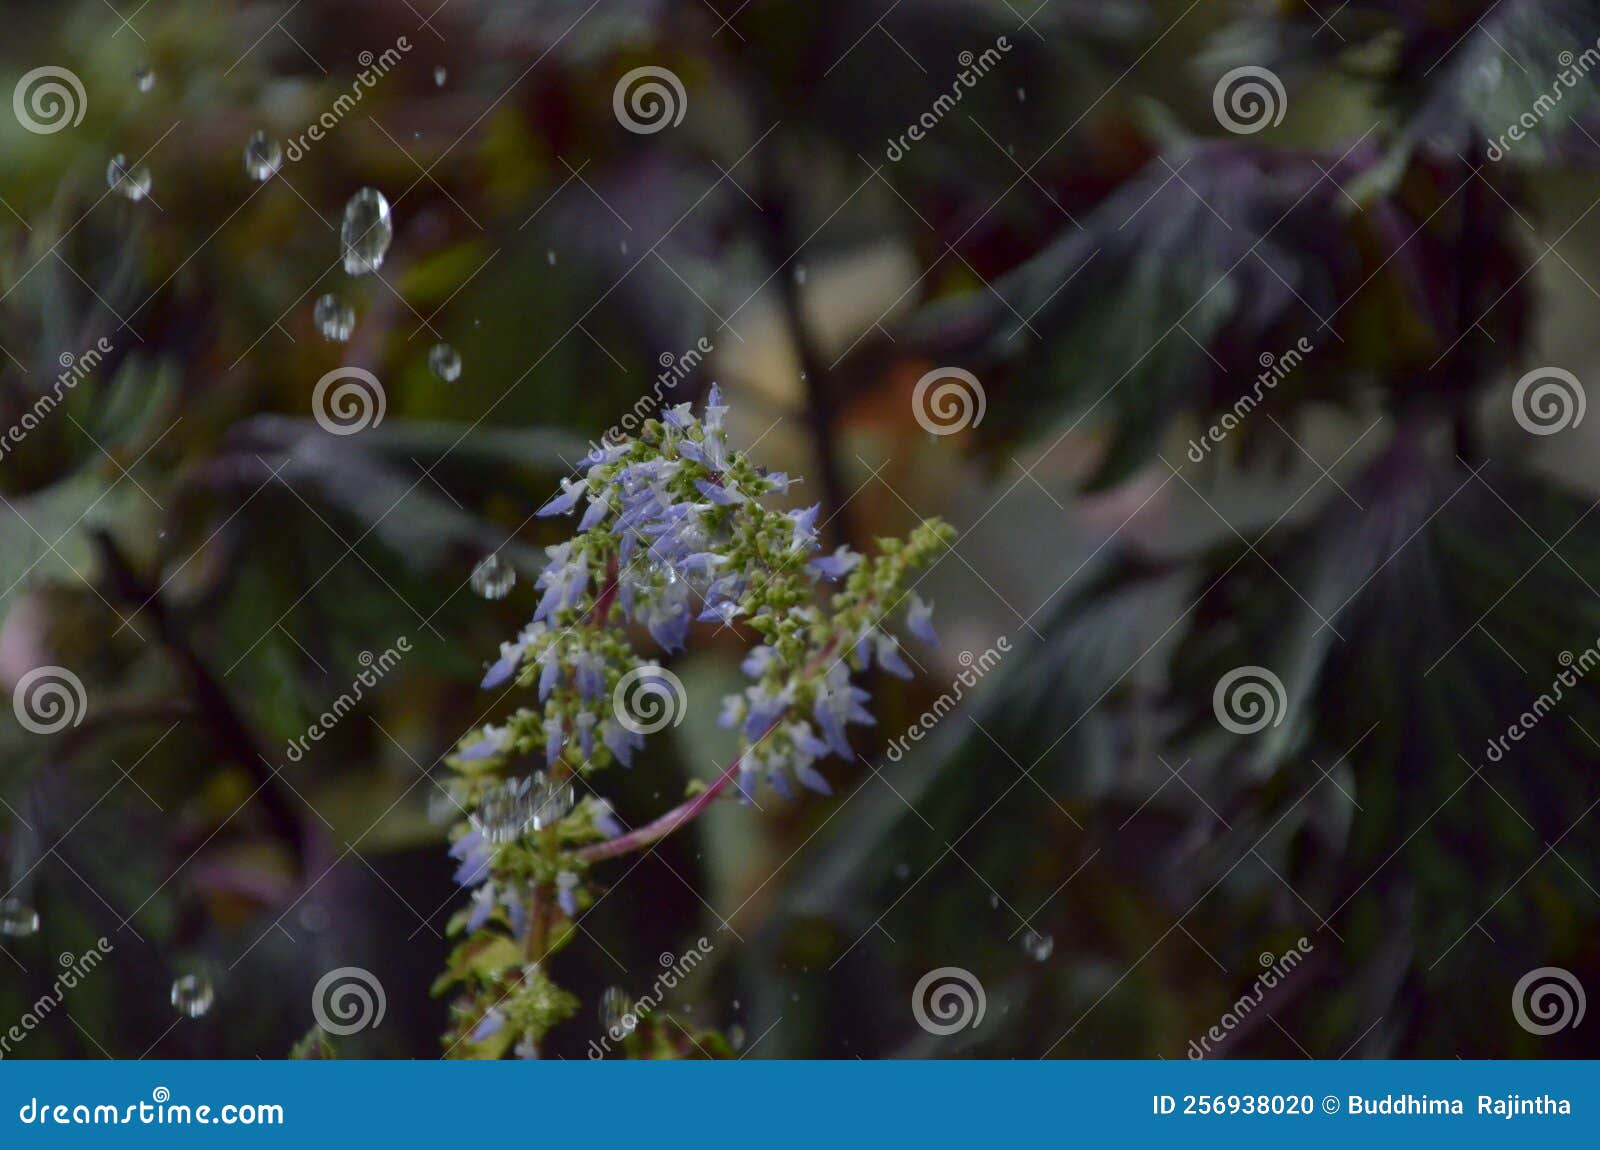 1234567890 Stock Photo, Picture and Royalty Free Image. Image 17800787.